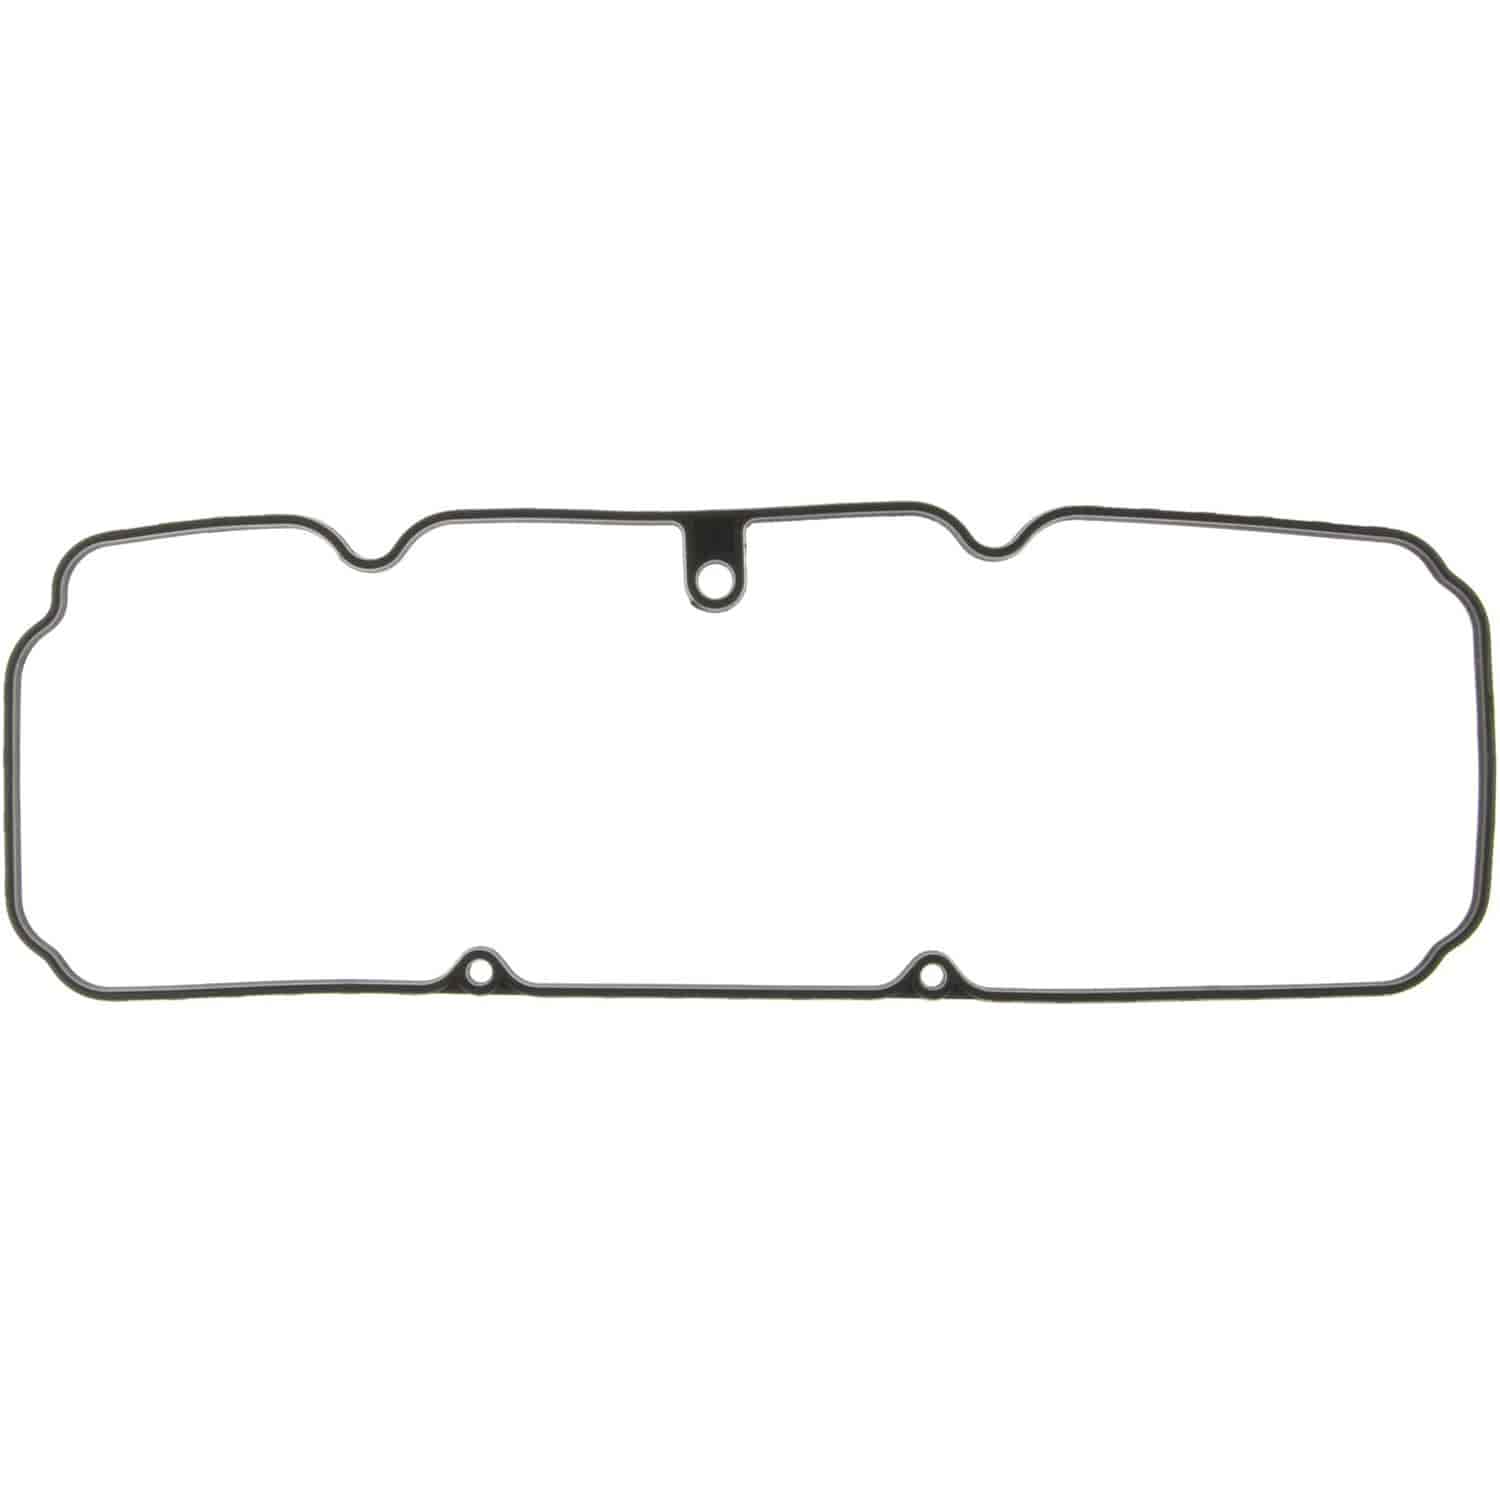 Valve Cover Gasket 1998-2003 GM L4 2.2L in Molded Rubber